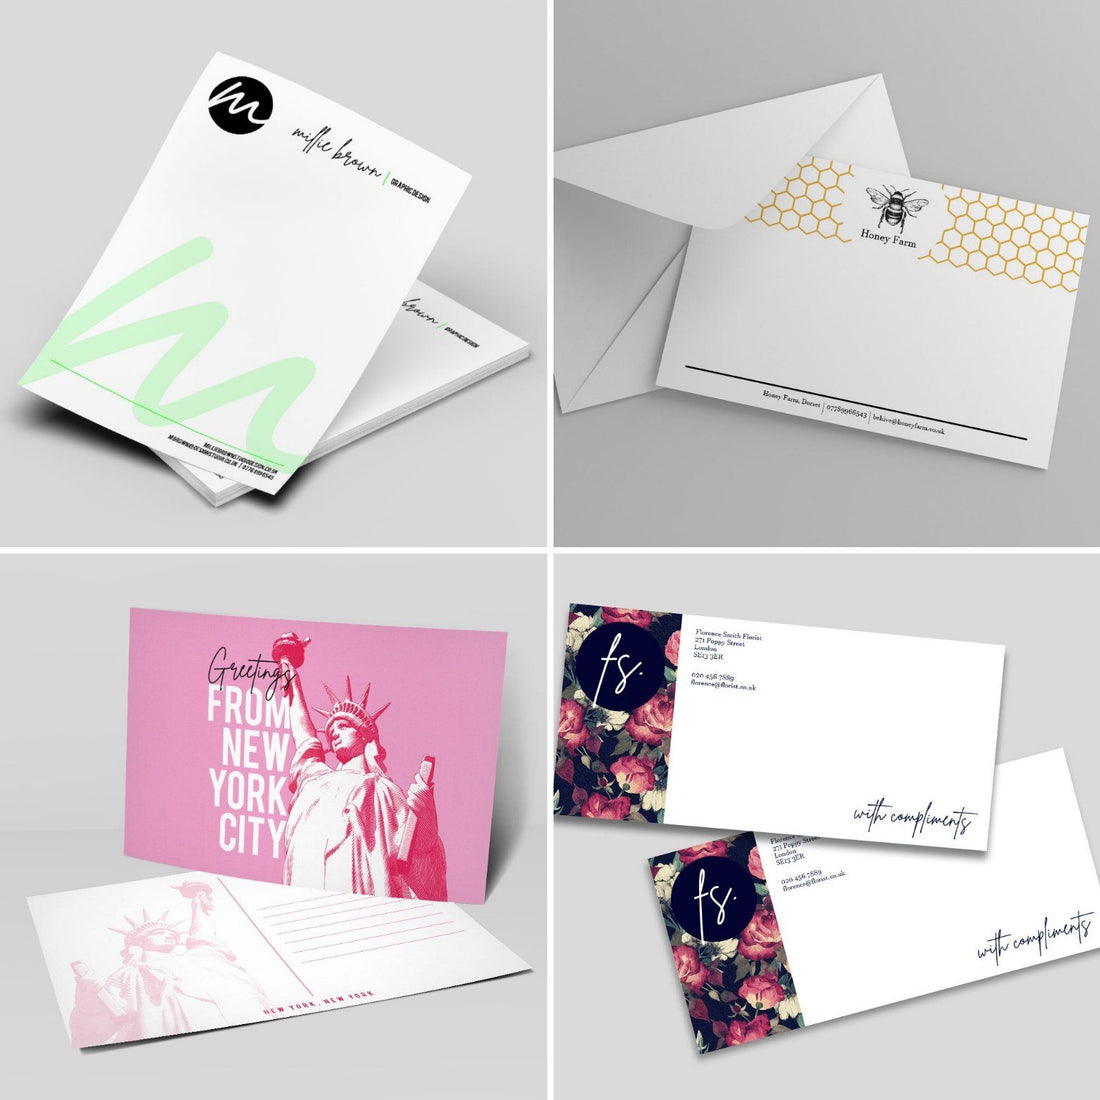 Custom Printed Stationery - Perfect for your Office & Business!